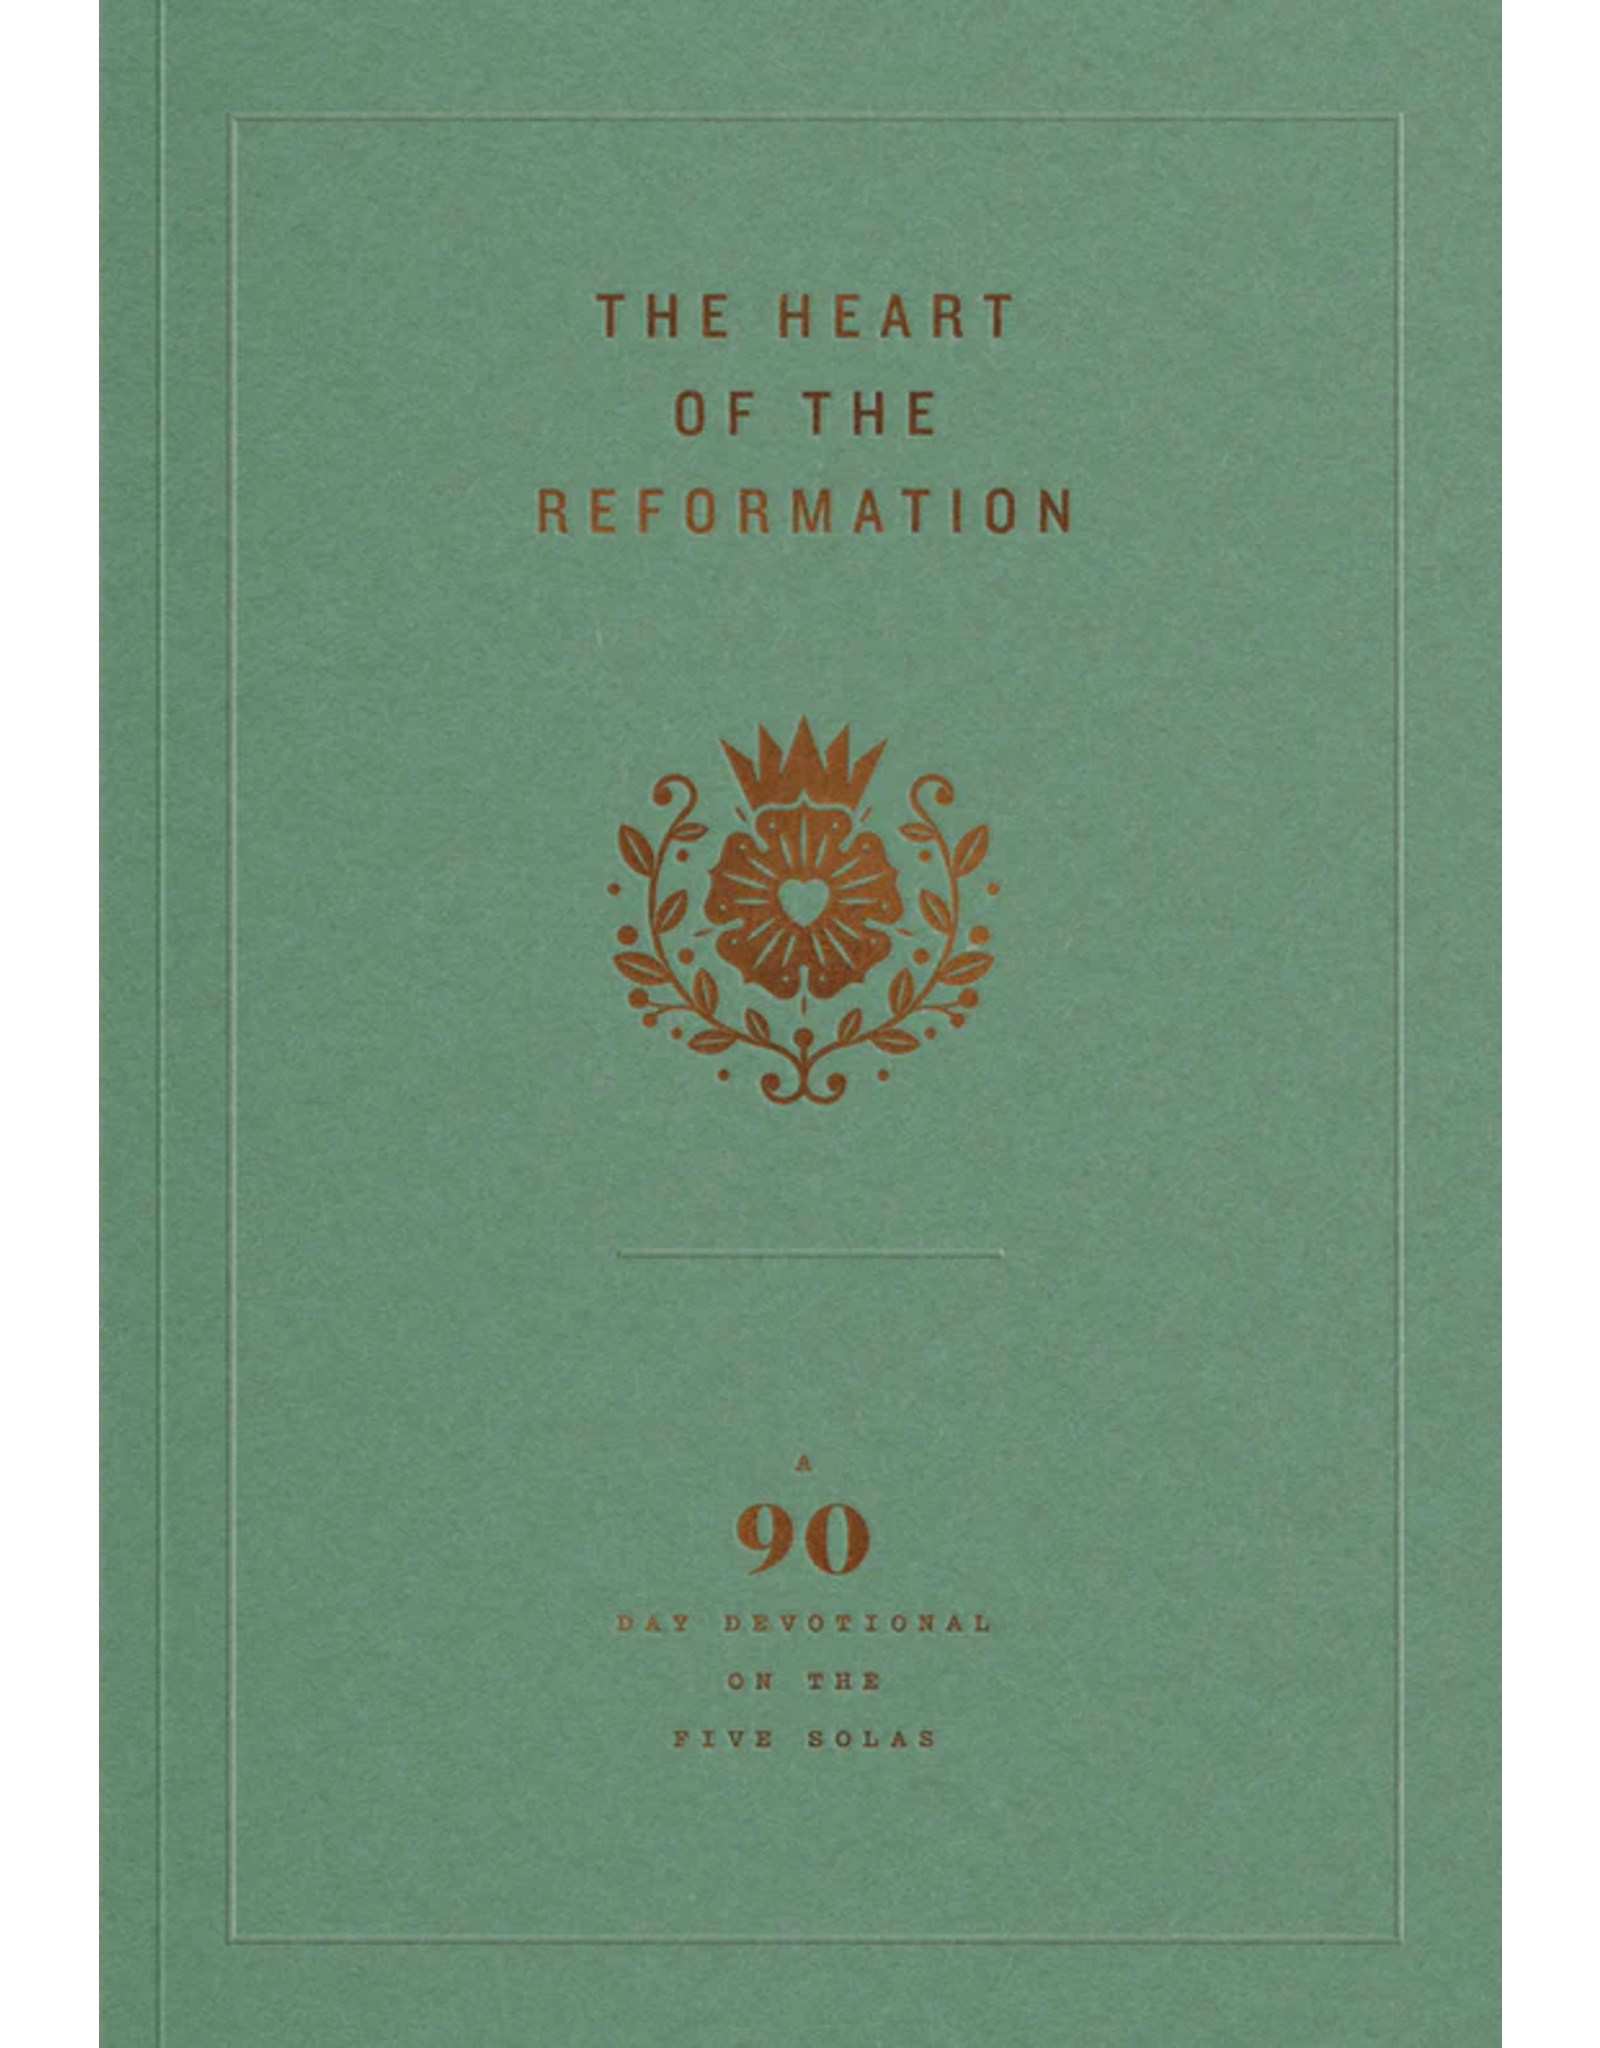 Ligonier The Heart of the Reformation:  A 90-Day Devotional on the Five Solas